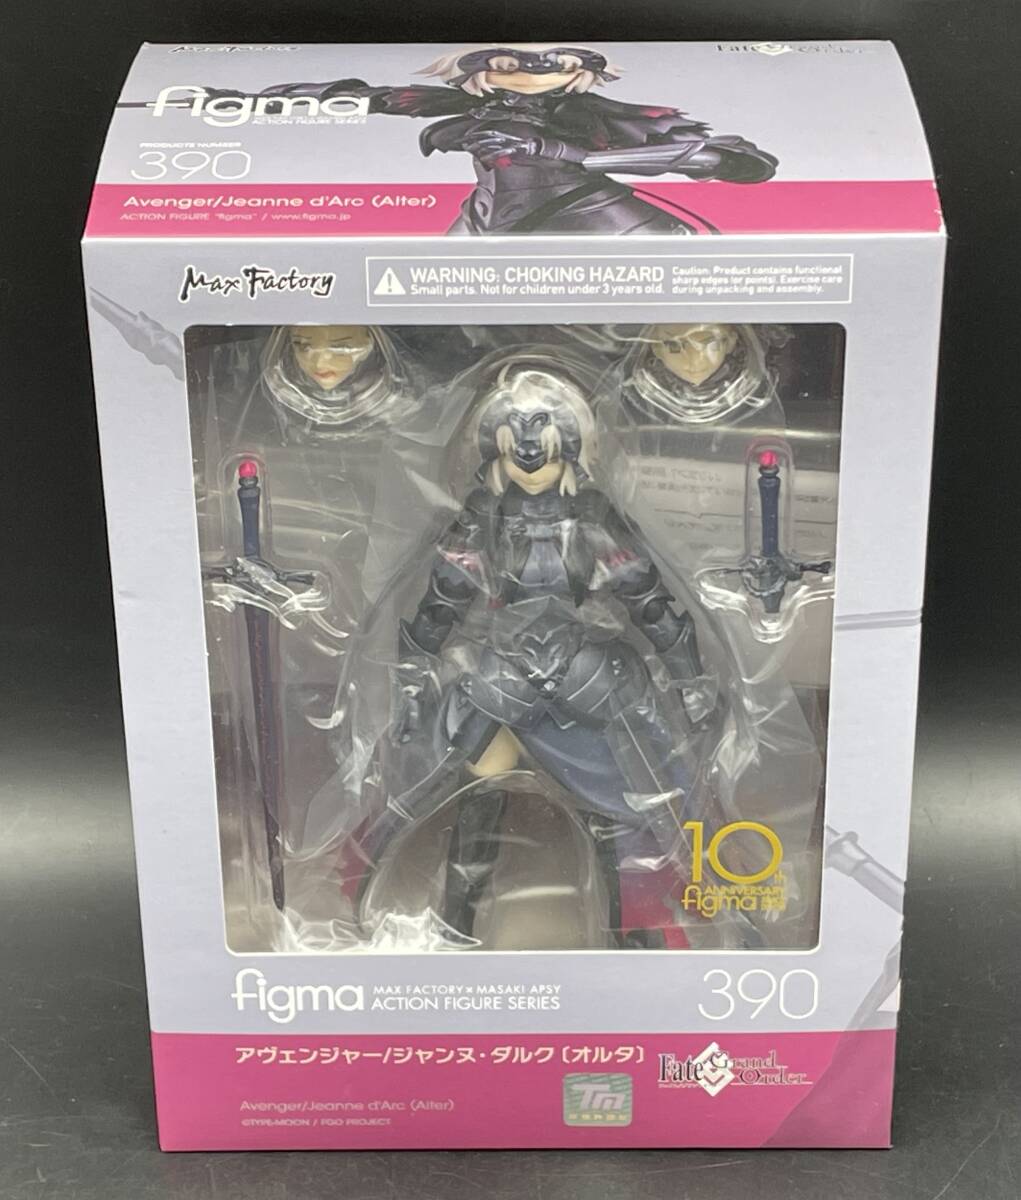 *[ including in a package un- possible ] secondhand goods figma 390 Fate/Grand Orderaven jersey .nn*daruk Horta 